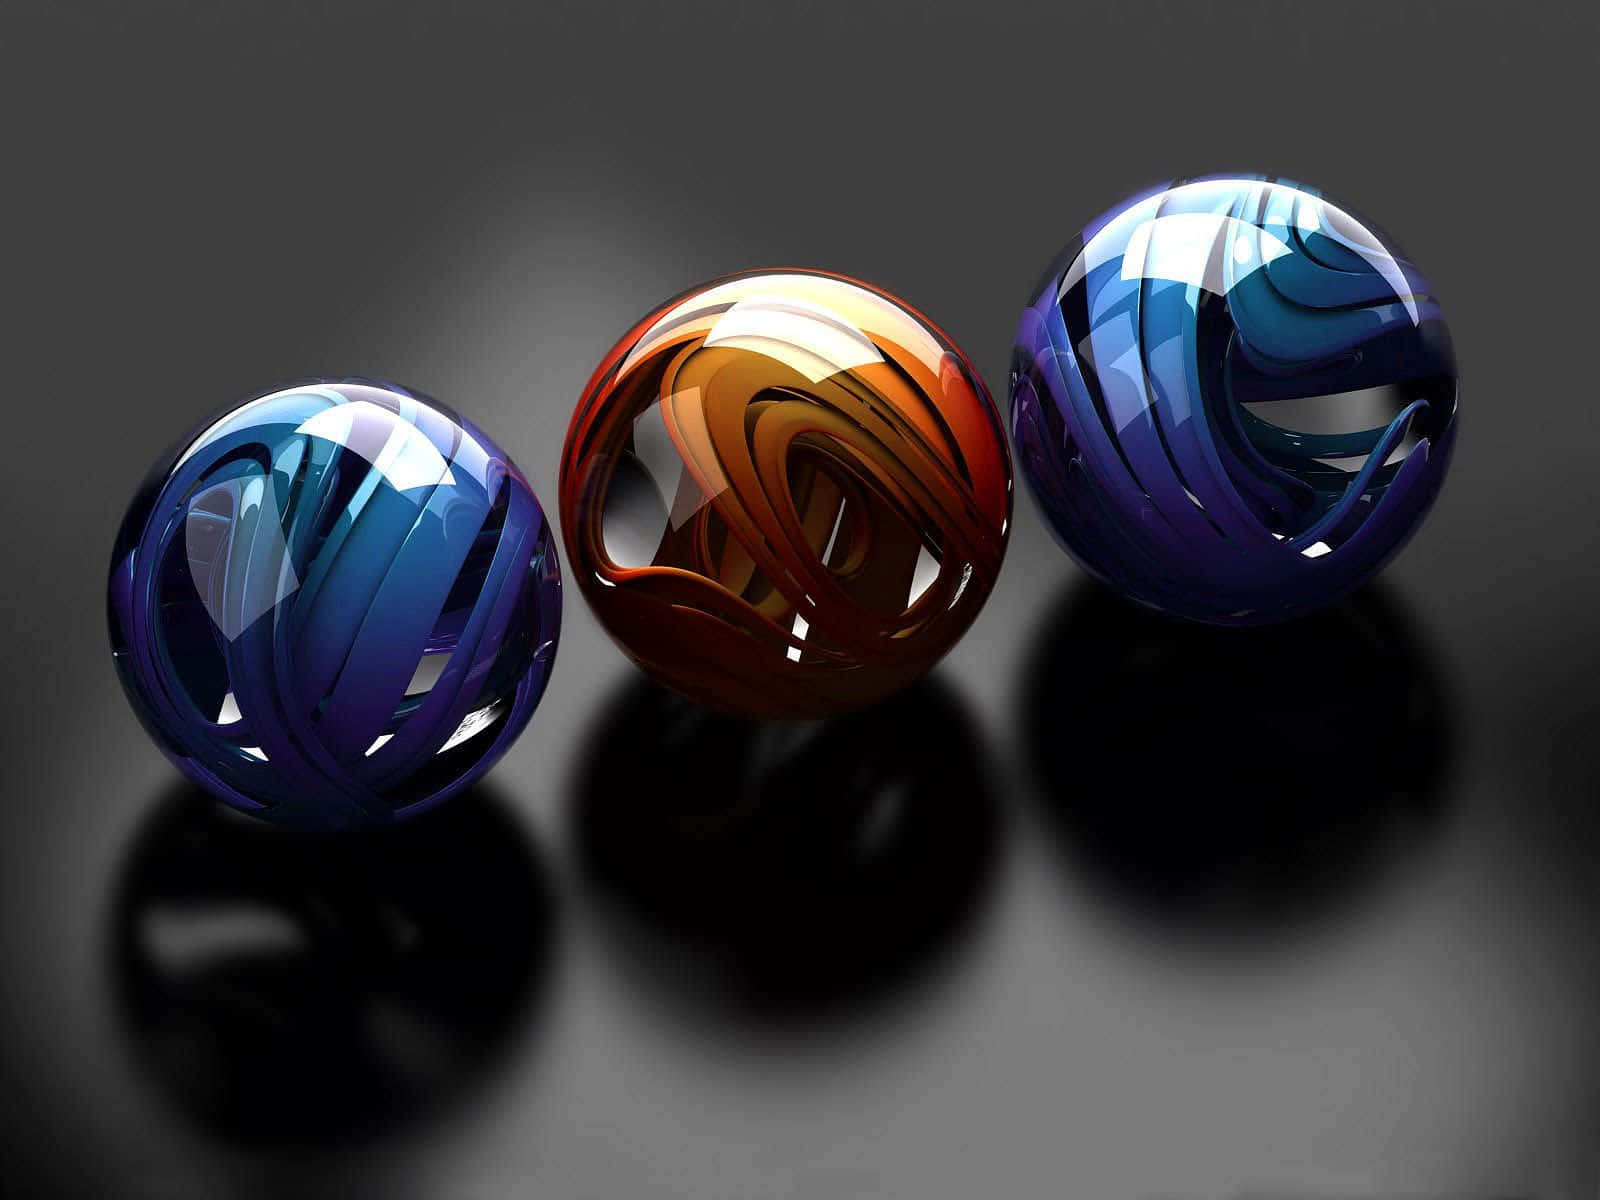 Three Colorful Balls On A Black Surface